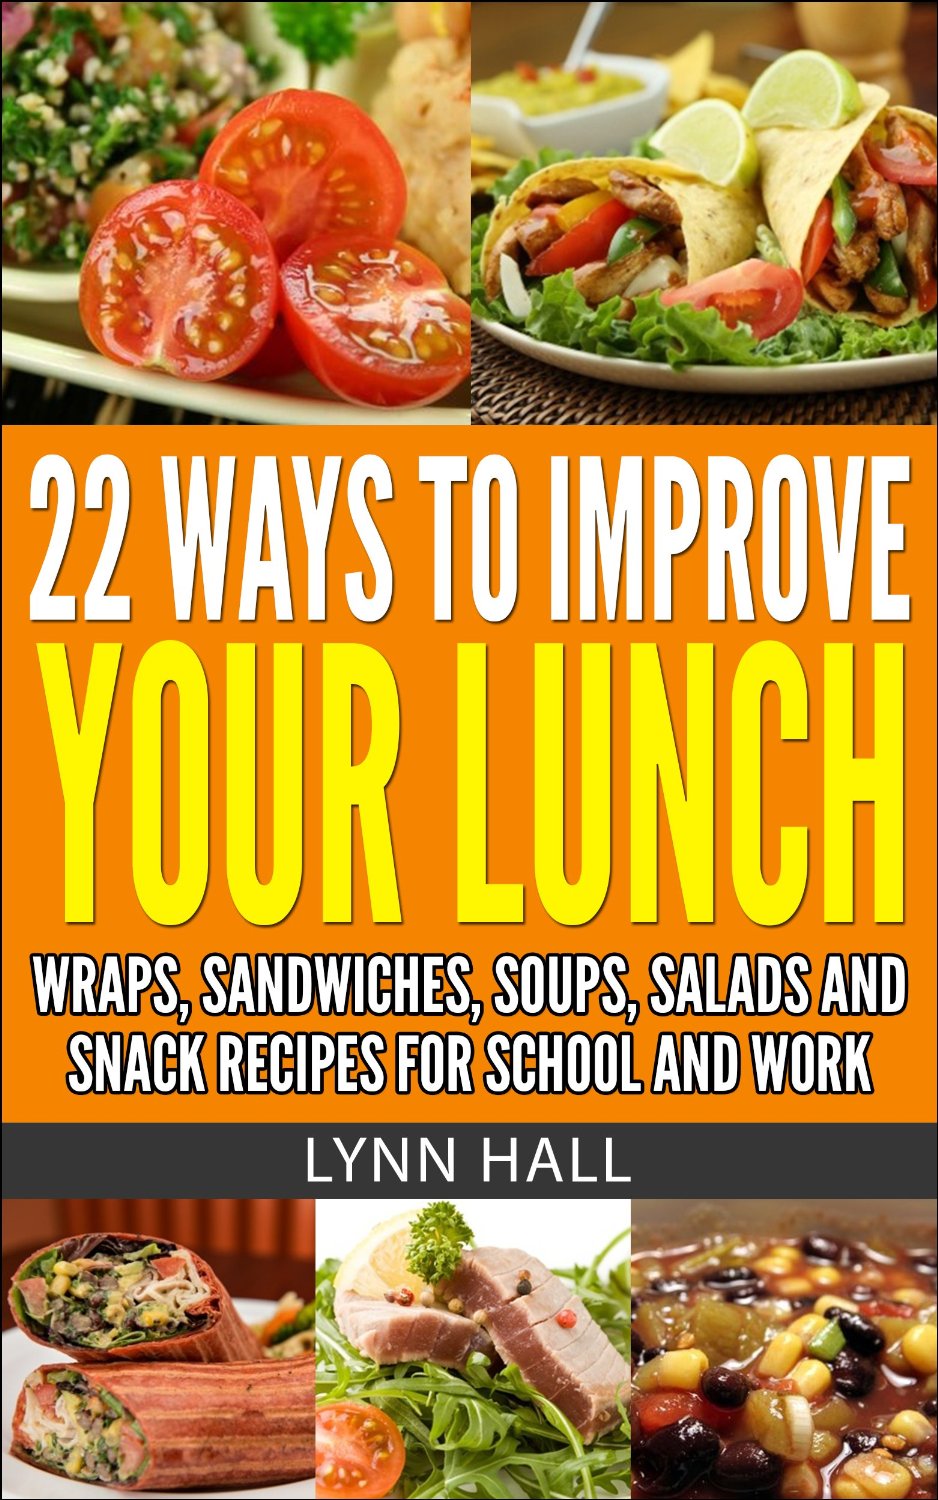 22 Ways to Improve Lunch: Recipes for Snacks, Sandwiches, Soups, Salads and Wraps for School and Work by Lynn Hall